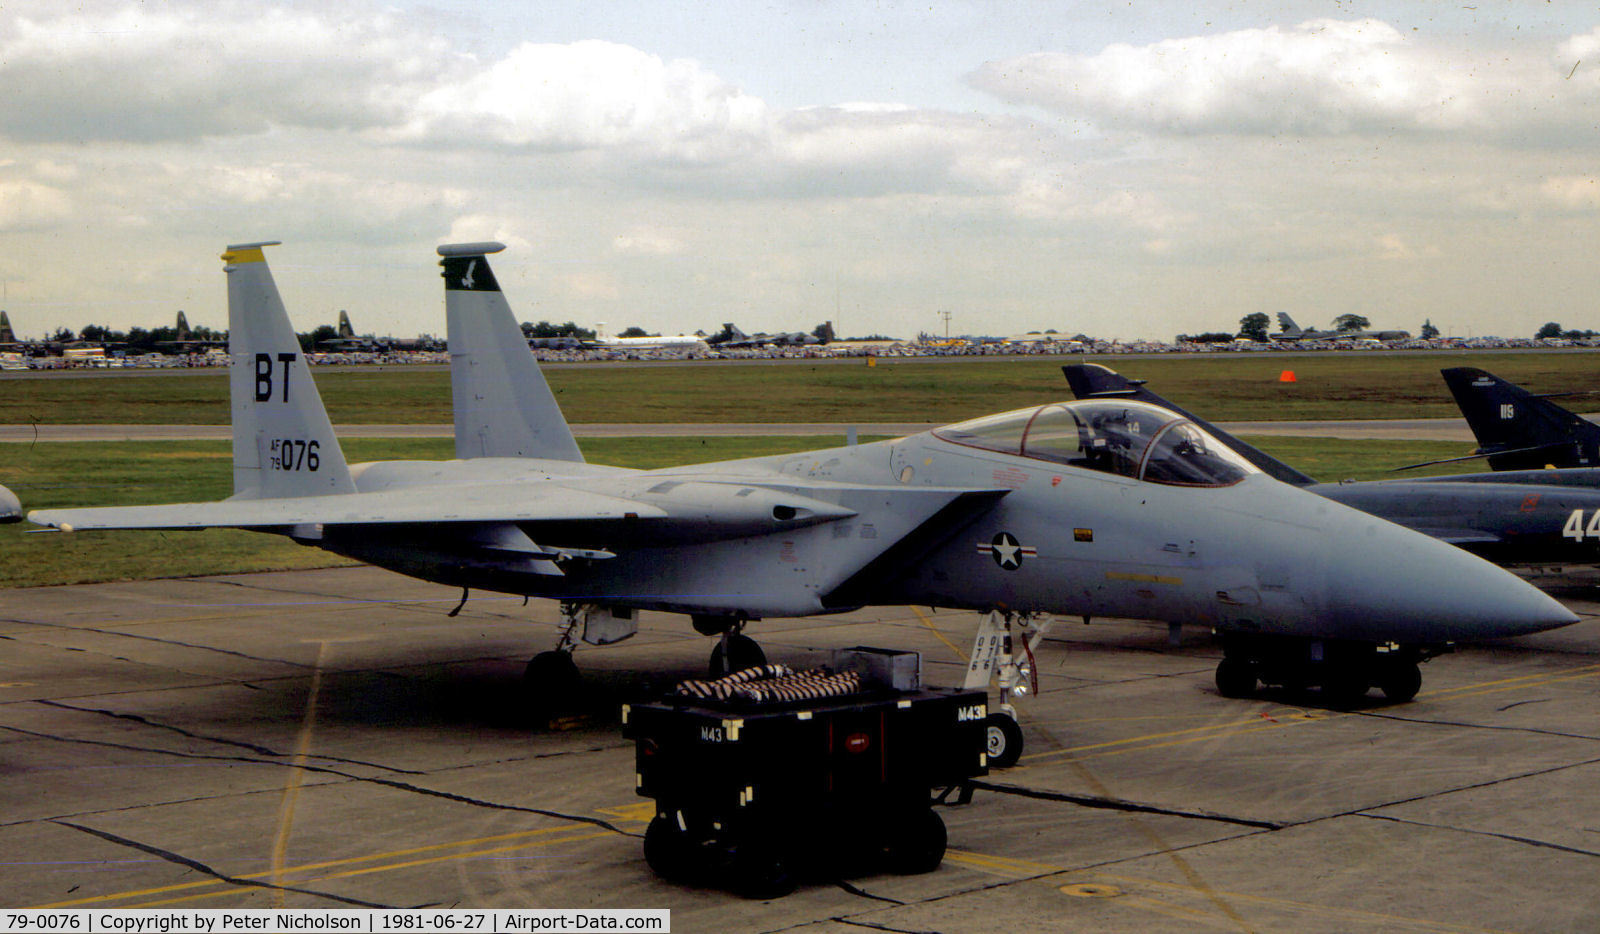 79-0076, 1979 McDonnell Douglas F-15C Eagle C/N 0625/C145, F-15C Eagle of 53rd Tactical Fighter Squadron/36th Tactical Fighter Wing based at Bitburg on the flight-line at the 1981 Intnl Air tattoo at RAF Greenham Common.